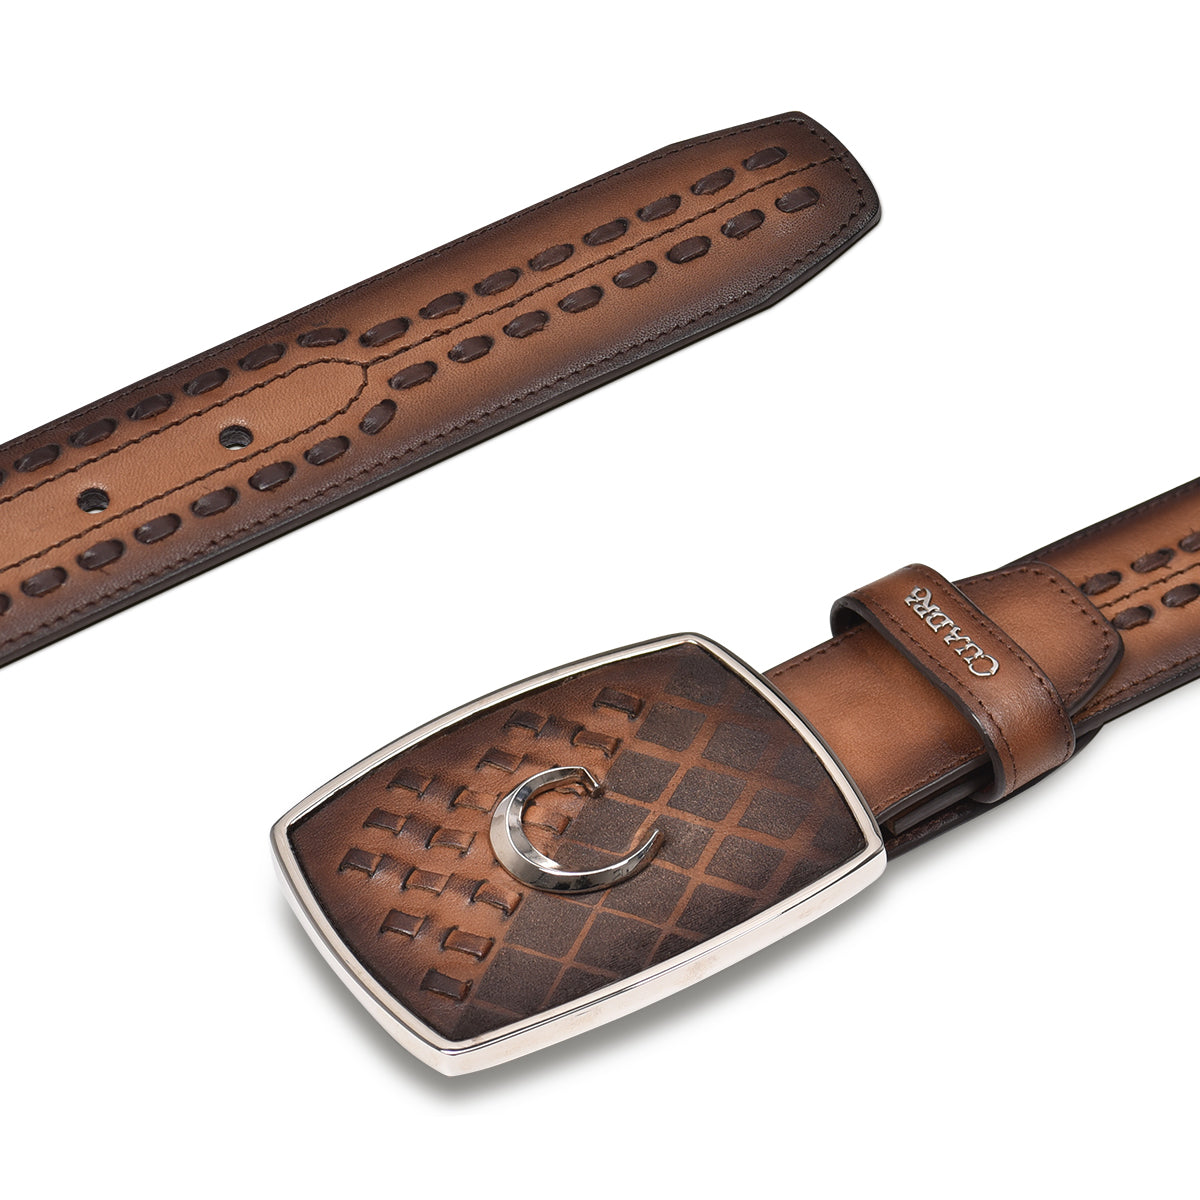 Hand-painted engraved honey western leather belt 3